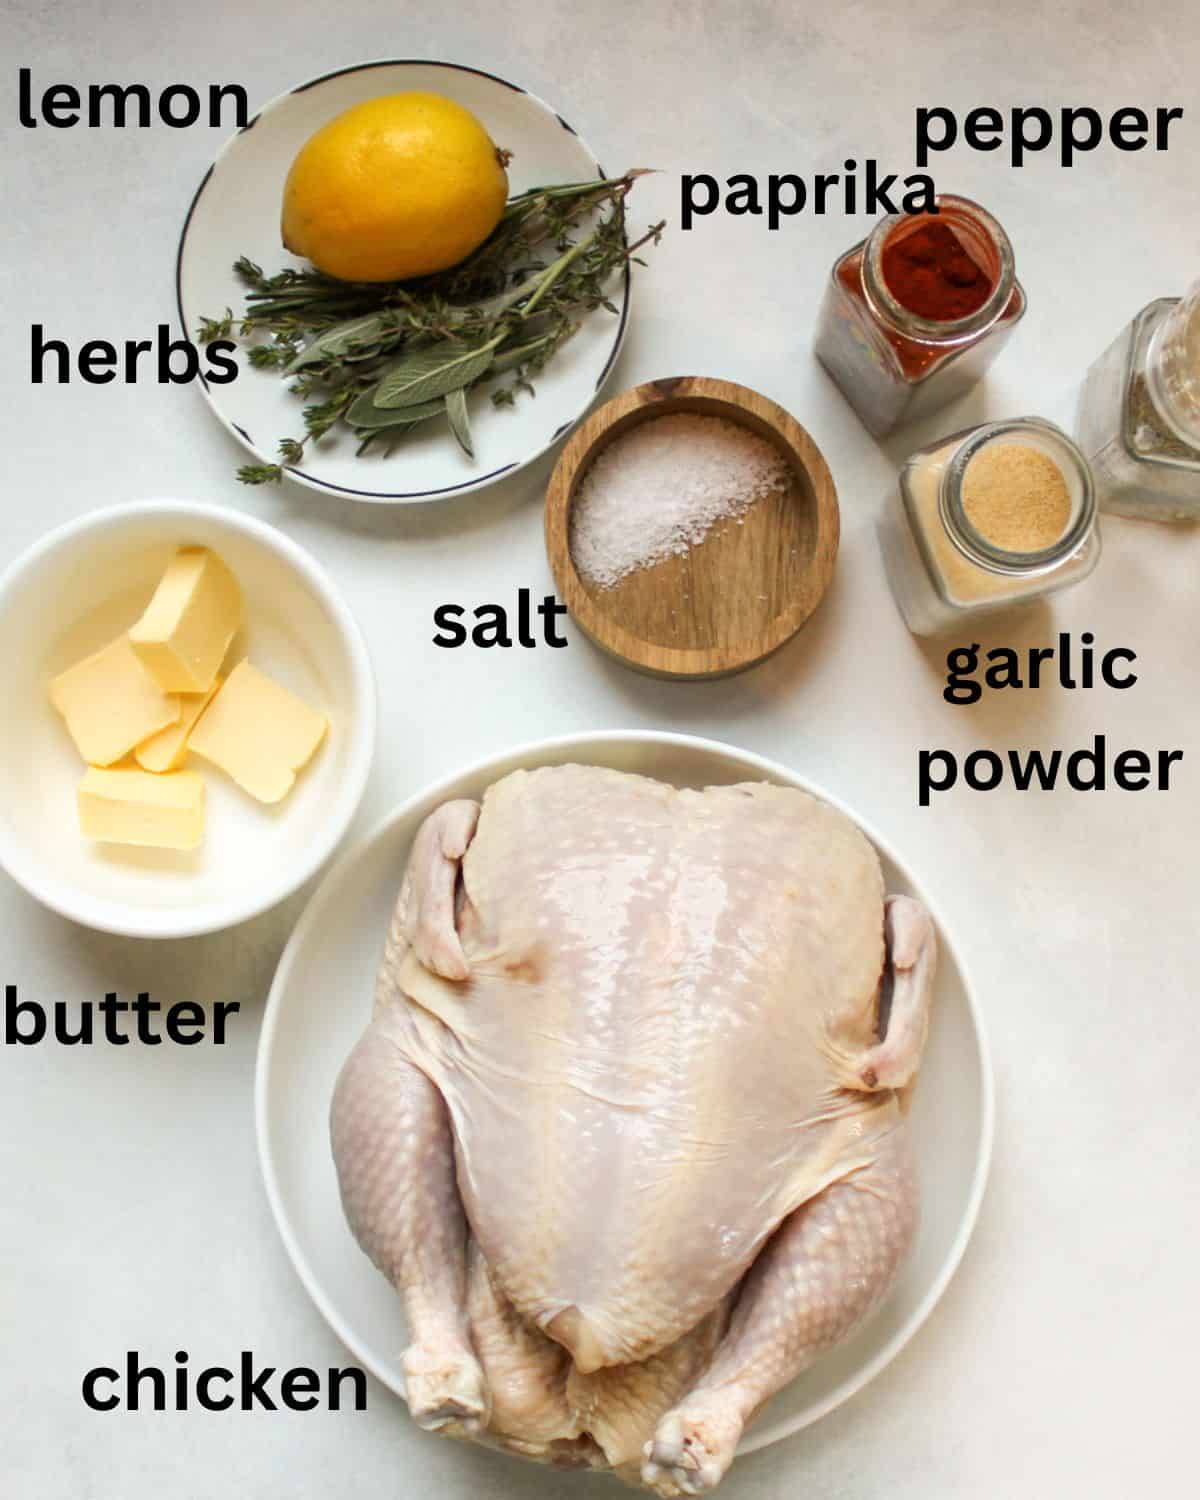 Recipe ingredients on a white background labeled as lemon hers, butter, chicken, paprika, salt, pepper, garlic powder.